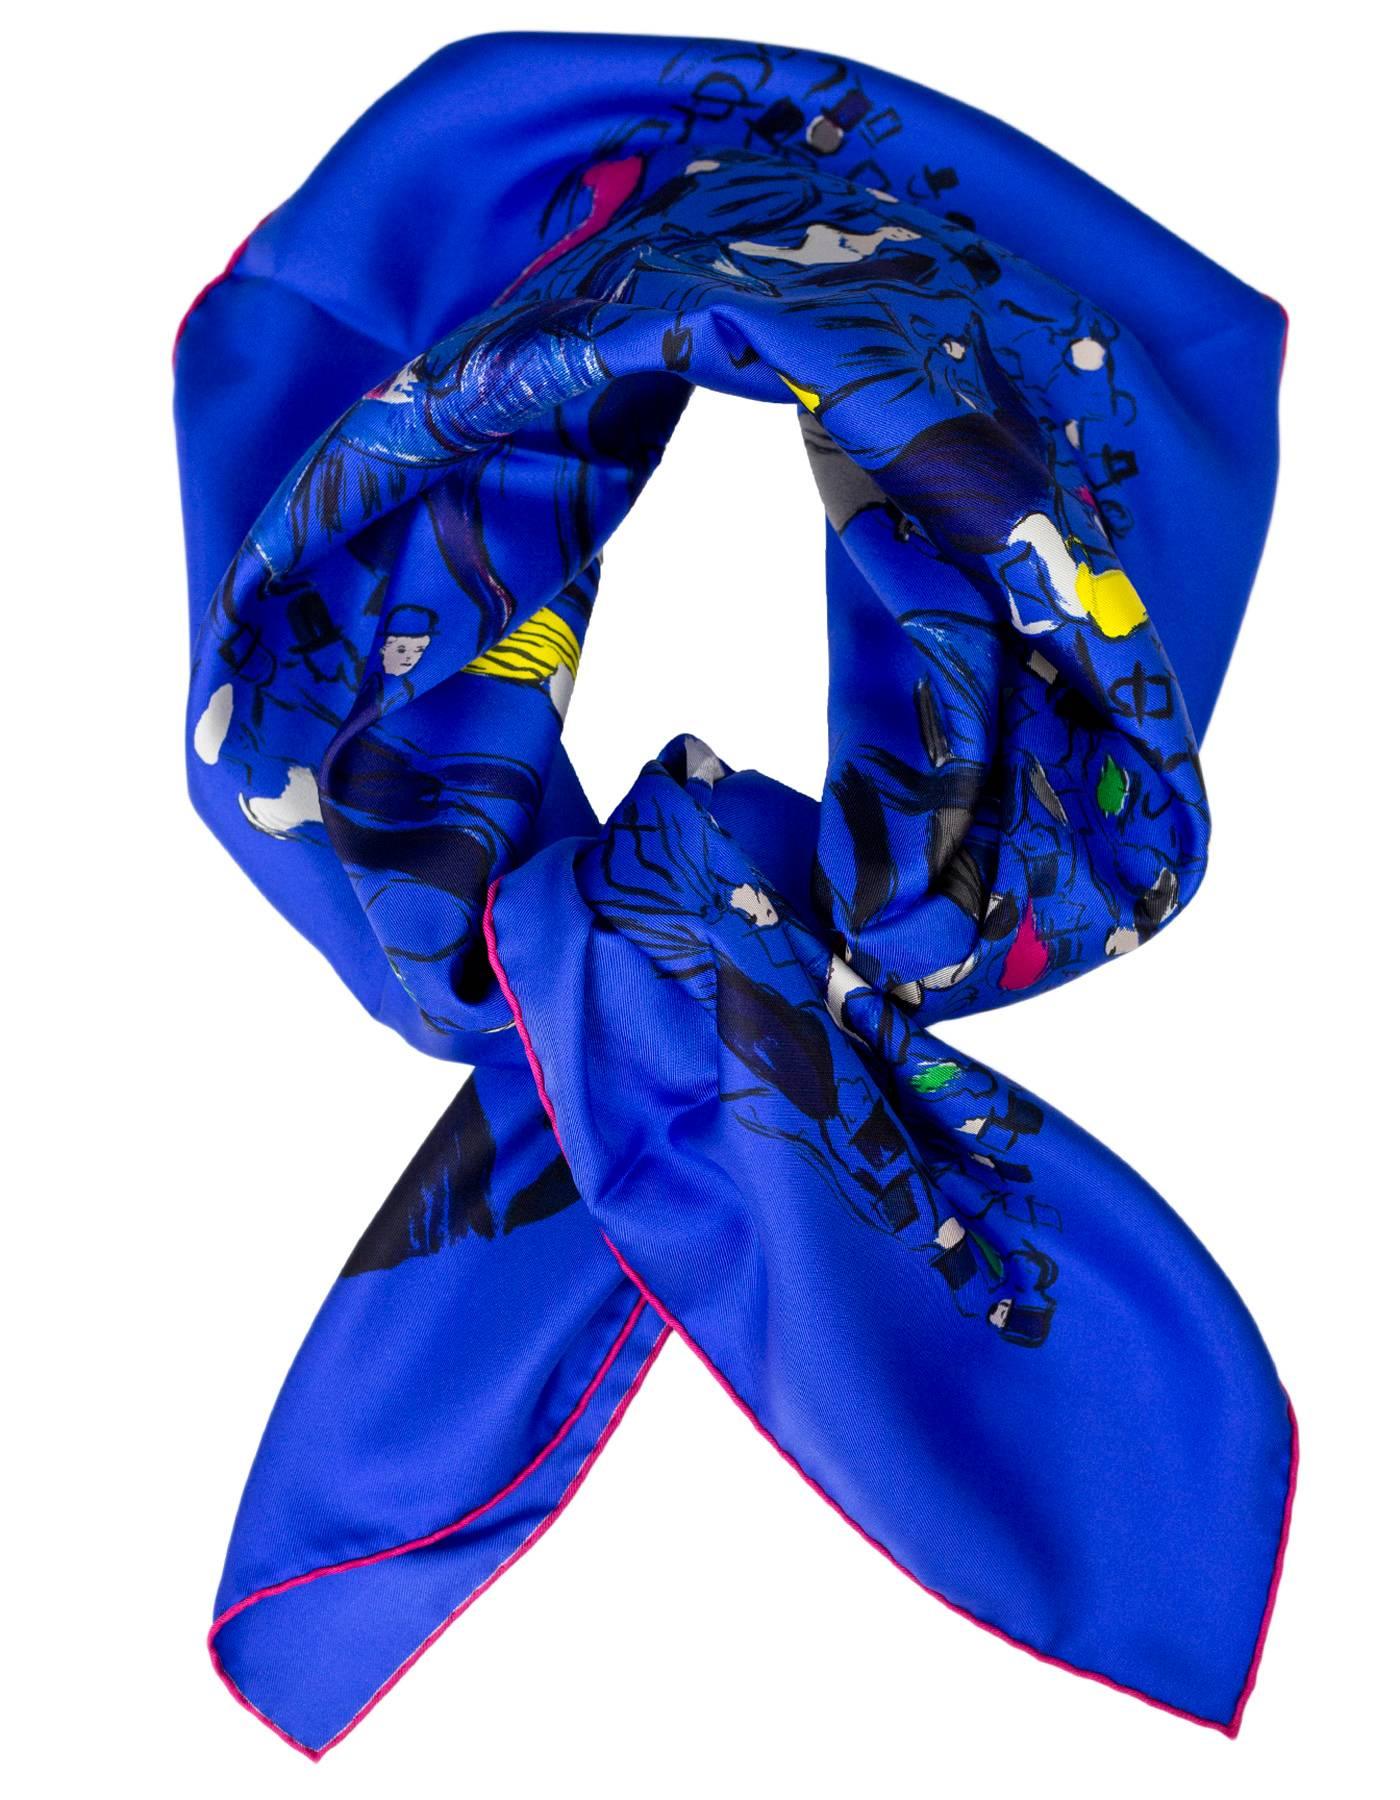 Hermes Blue Paddock Silk 90cm Scarf NWT

Made In: France
Color: Blue
Composition: 100% Silk
Retail Price: $395 + tax
Overall Condition: Excellent pre-owned condition - NWT
Included: Hermes box, tag
Measurements:
Length: 35"
Width: 35"